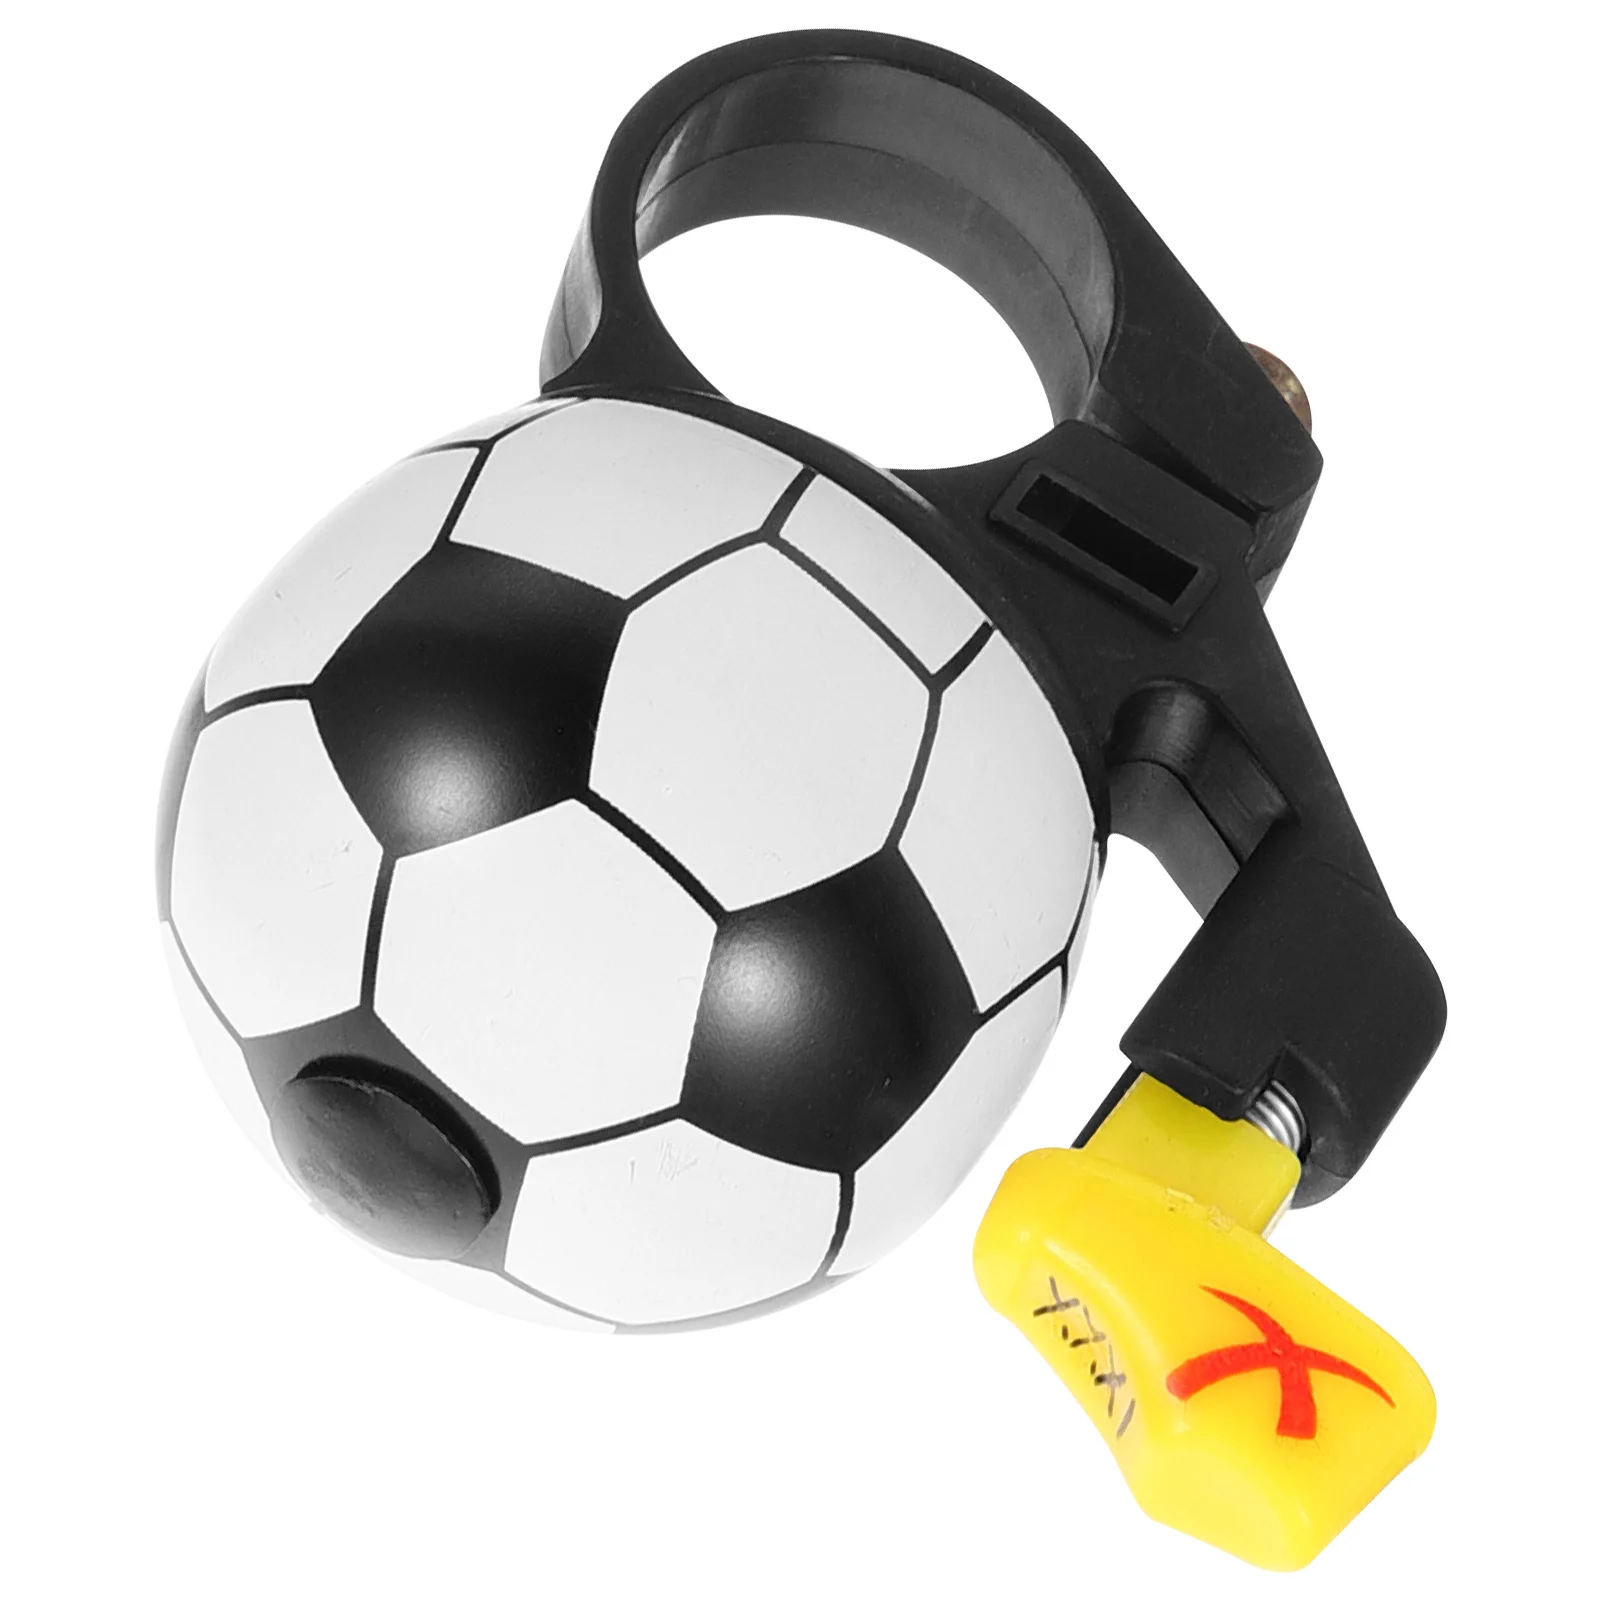 

Soccer Bicycle Bell Childrens Bell Bike Bell Bicycle Bell Handlebars Bike Ring Bell Loud Sound Bicycle Ringer Bell Kids Bicycle